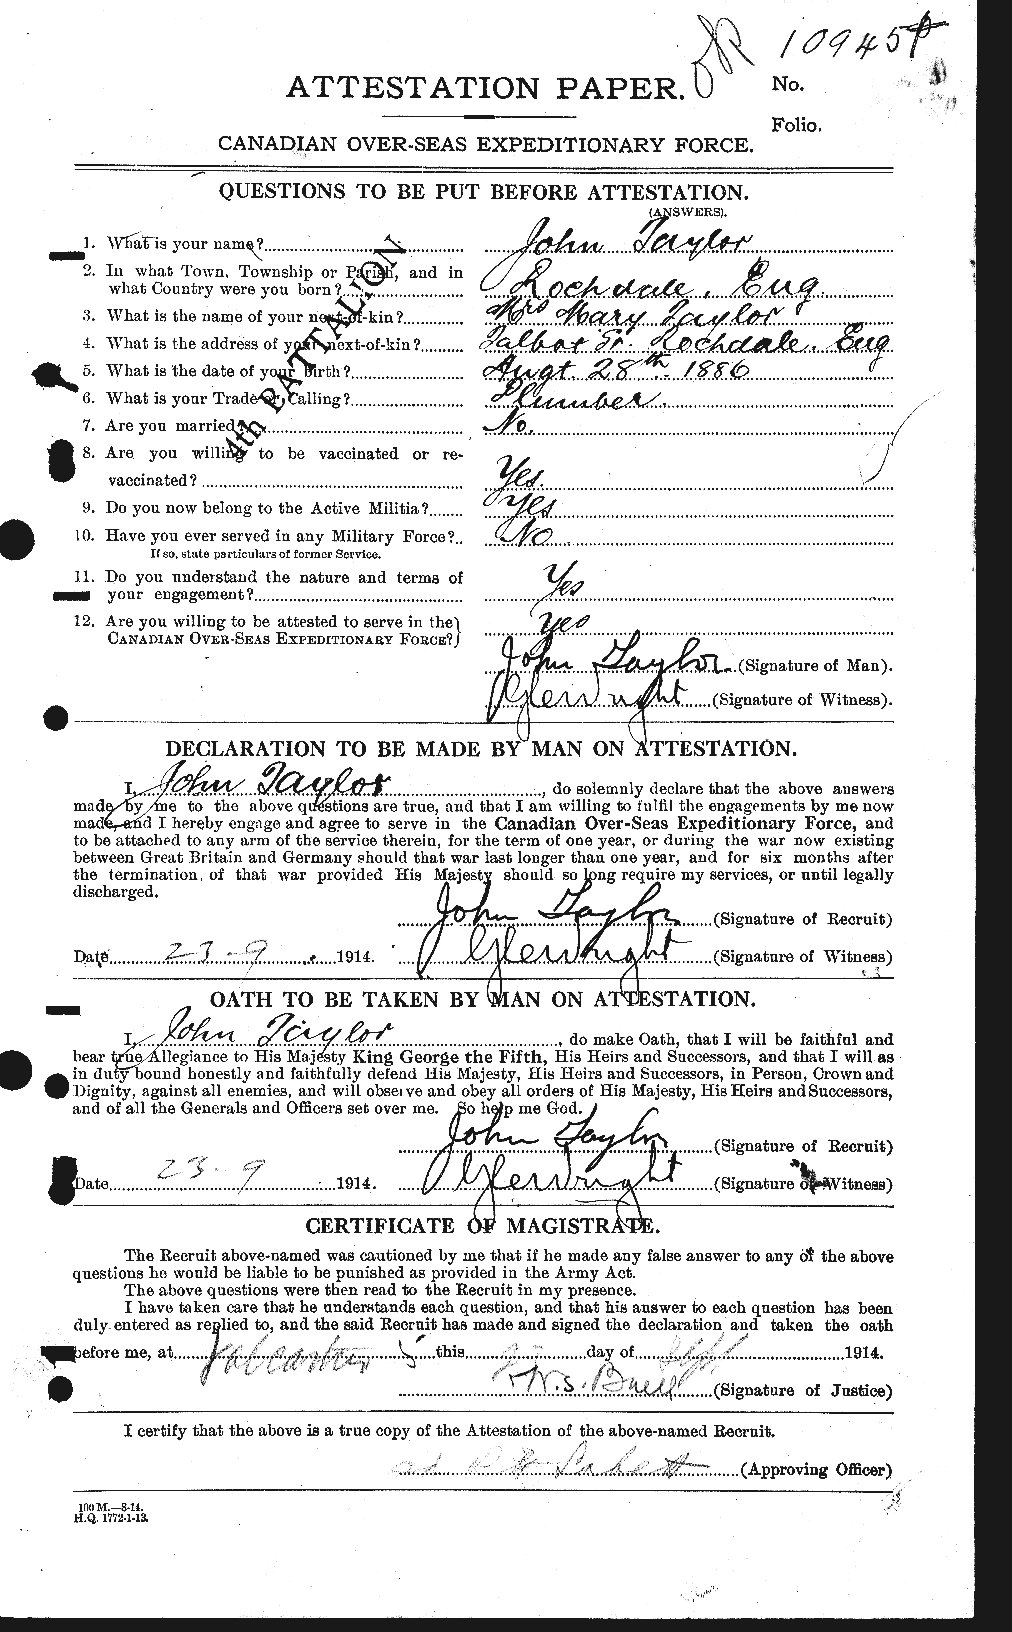 Personnel Records of the First World War - CEF 627007a